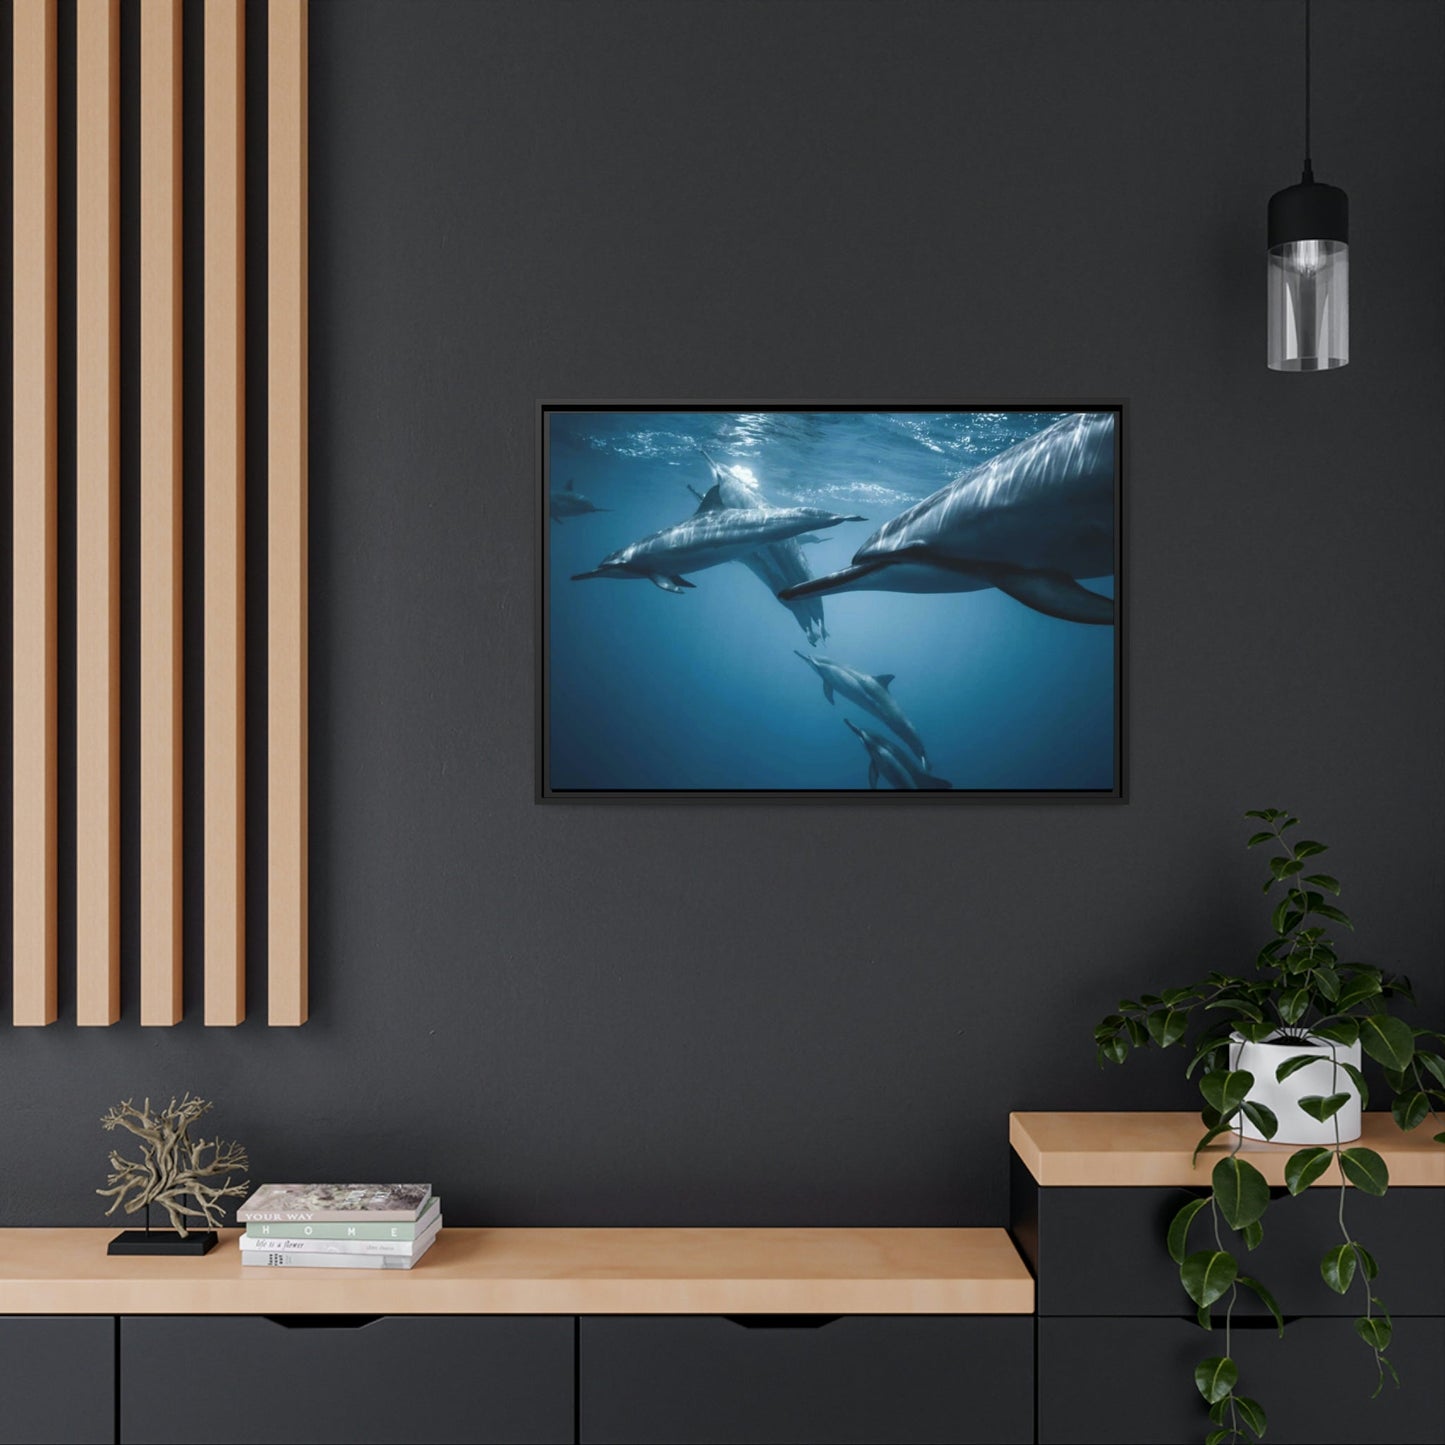 Dolphin Delight: Canvas Print and Wall Art of Joyful Dolphins